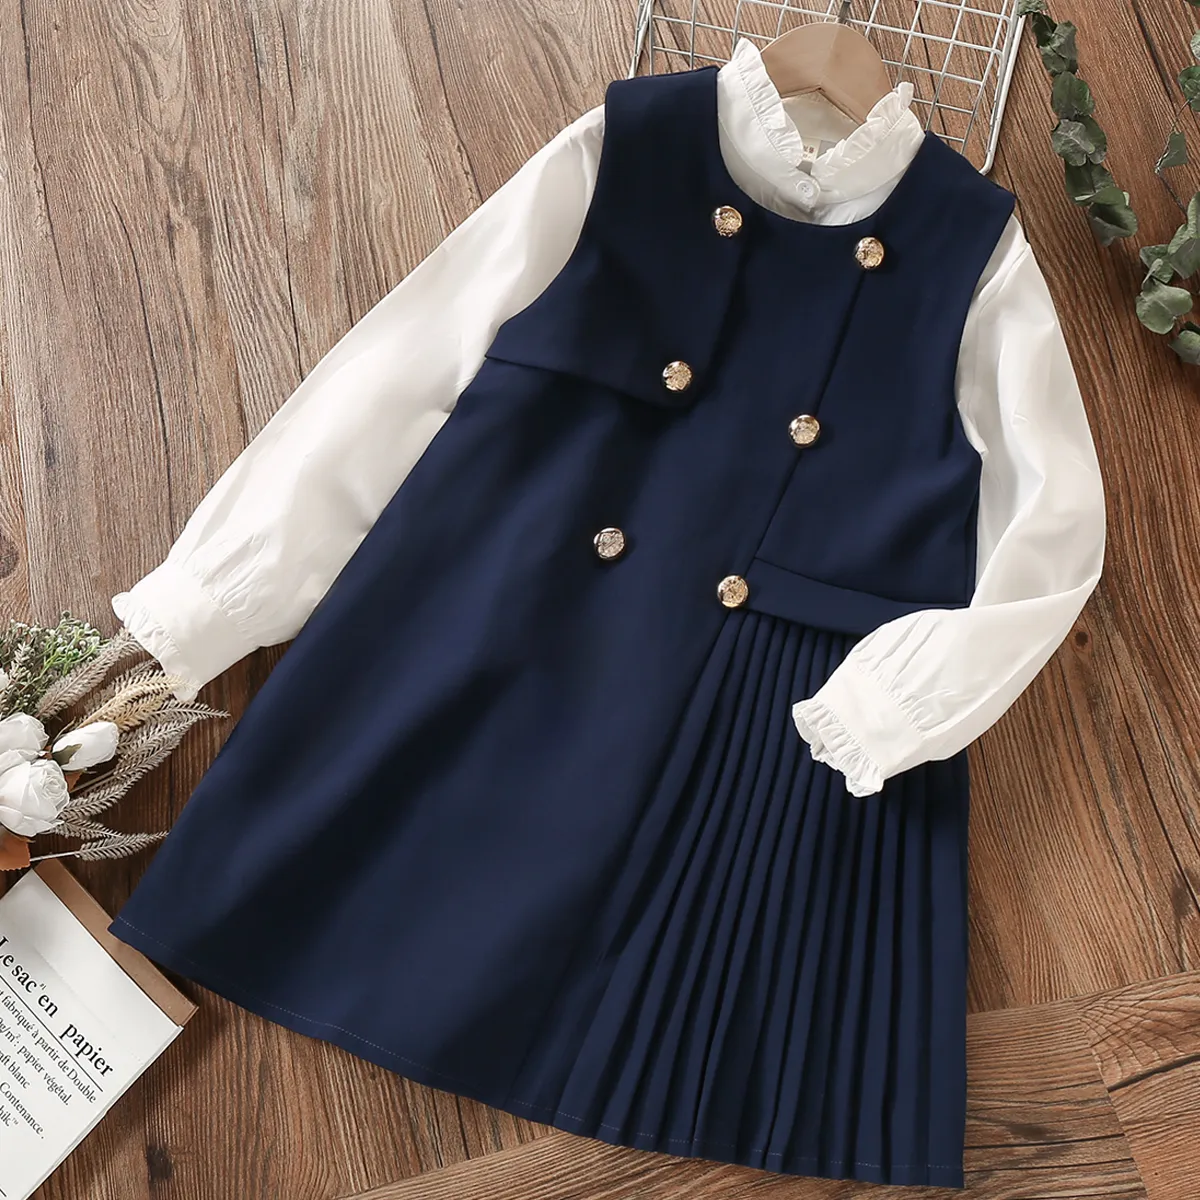 Girl's Dresses School Uniform Preppy Girls Clothes for Teenagers Baby Elegant Dress Shirt 2st Spring Autumn Children Costumes 8 10 12 13 Years 221110